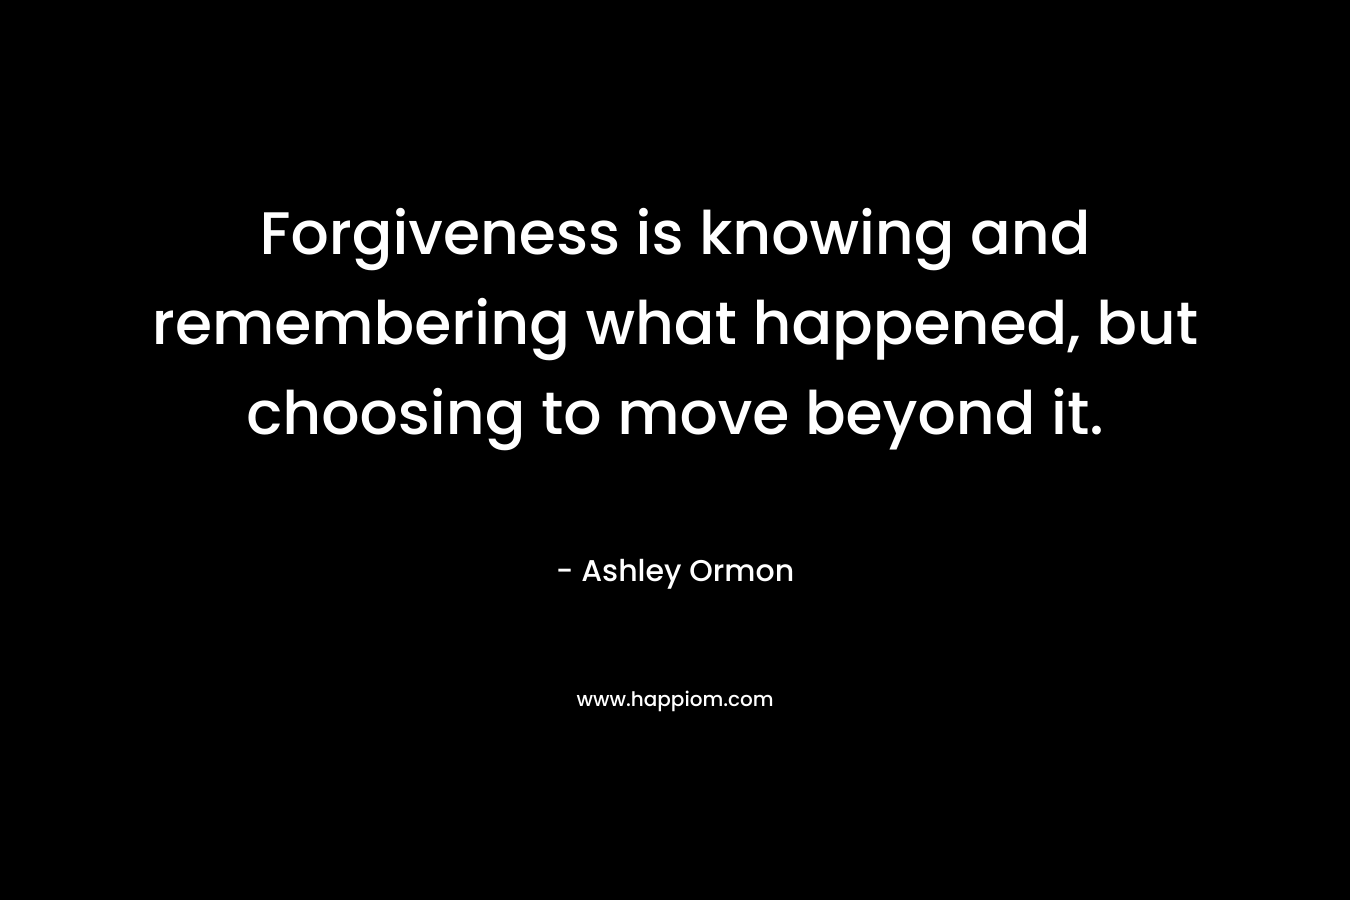 Forgiveness is knowing and remembering what happened, but choosing to move beyond it.